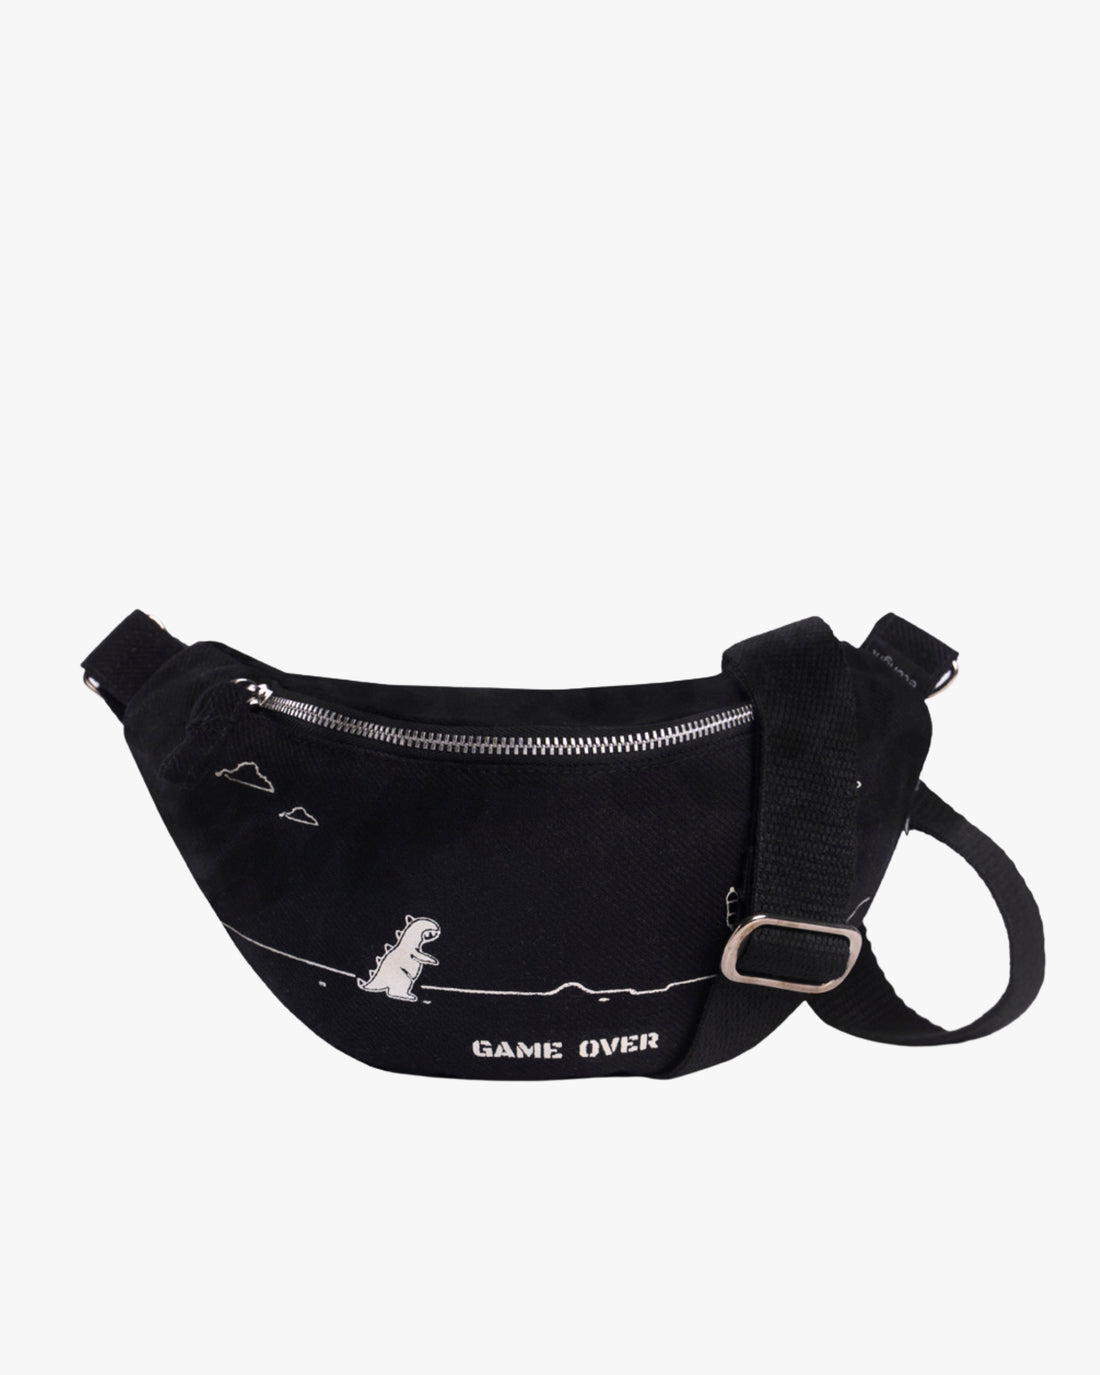 The Fanny Pack - Game Over